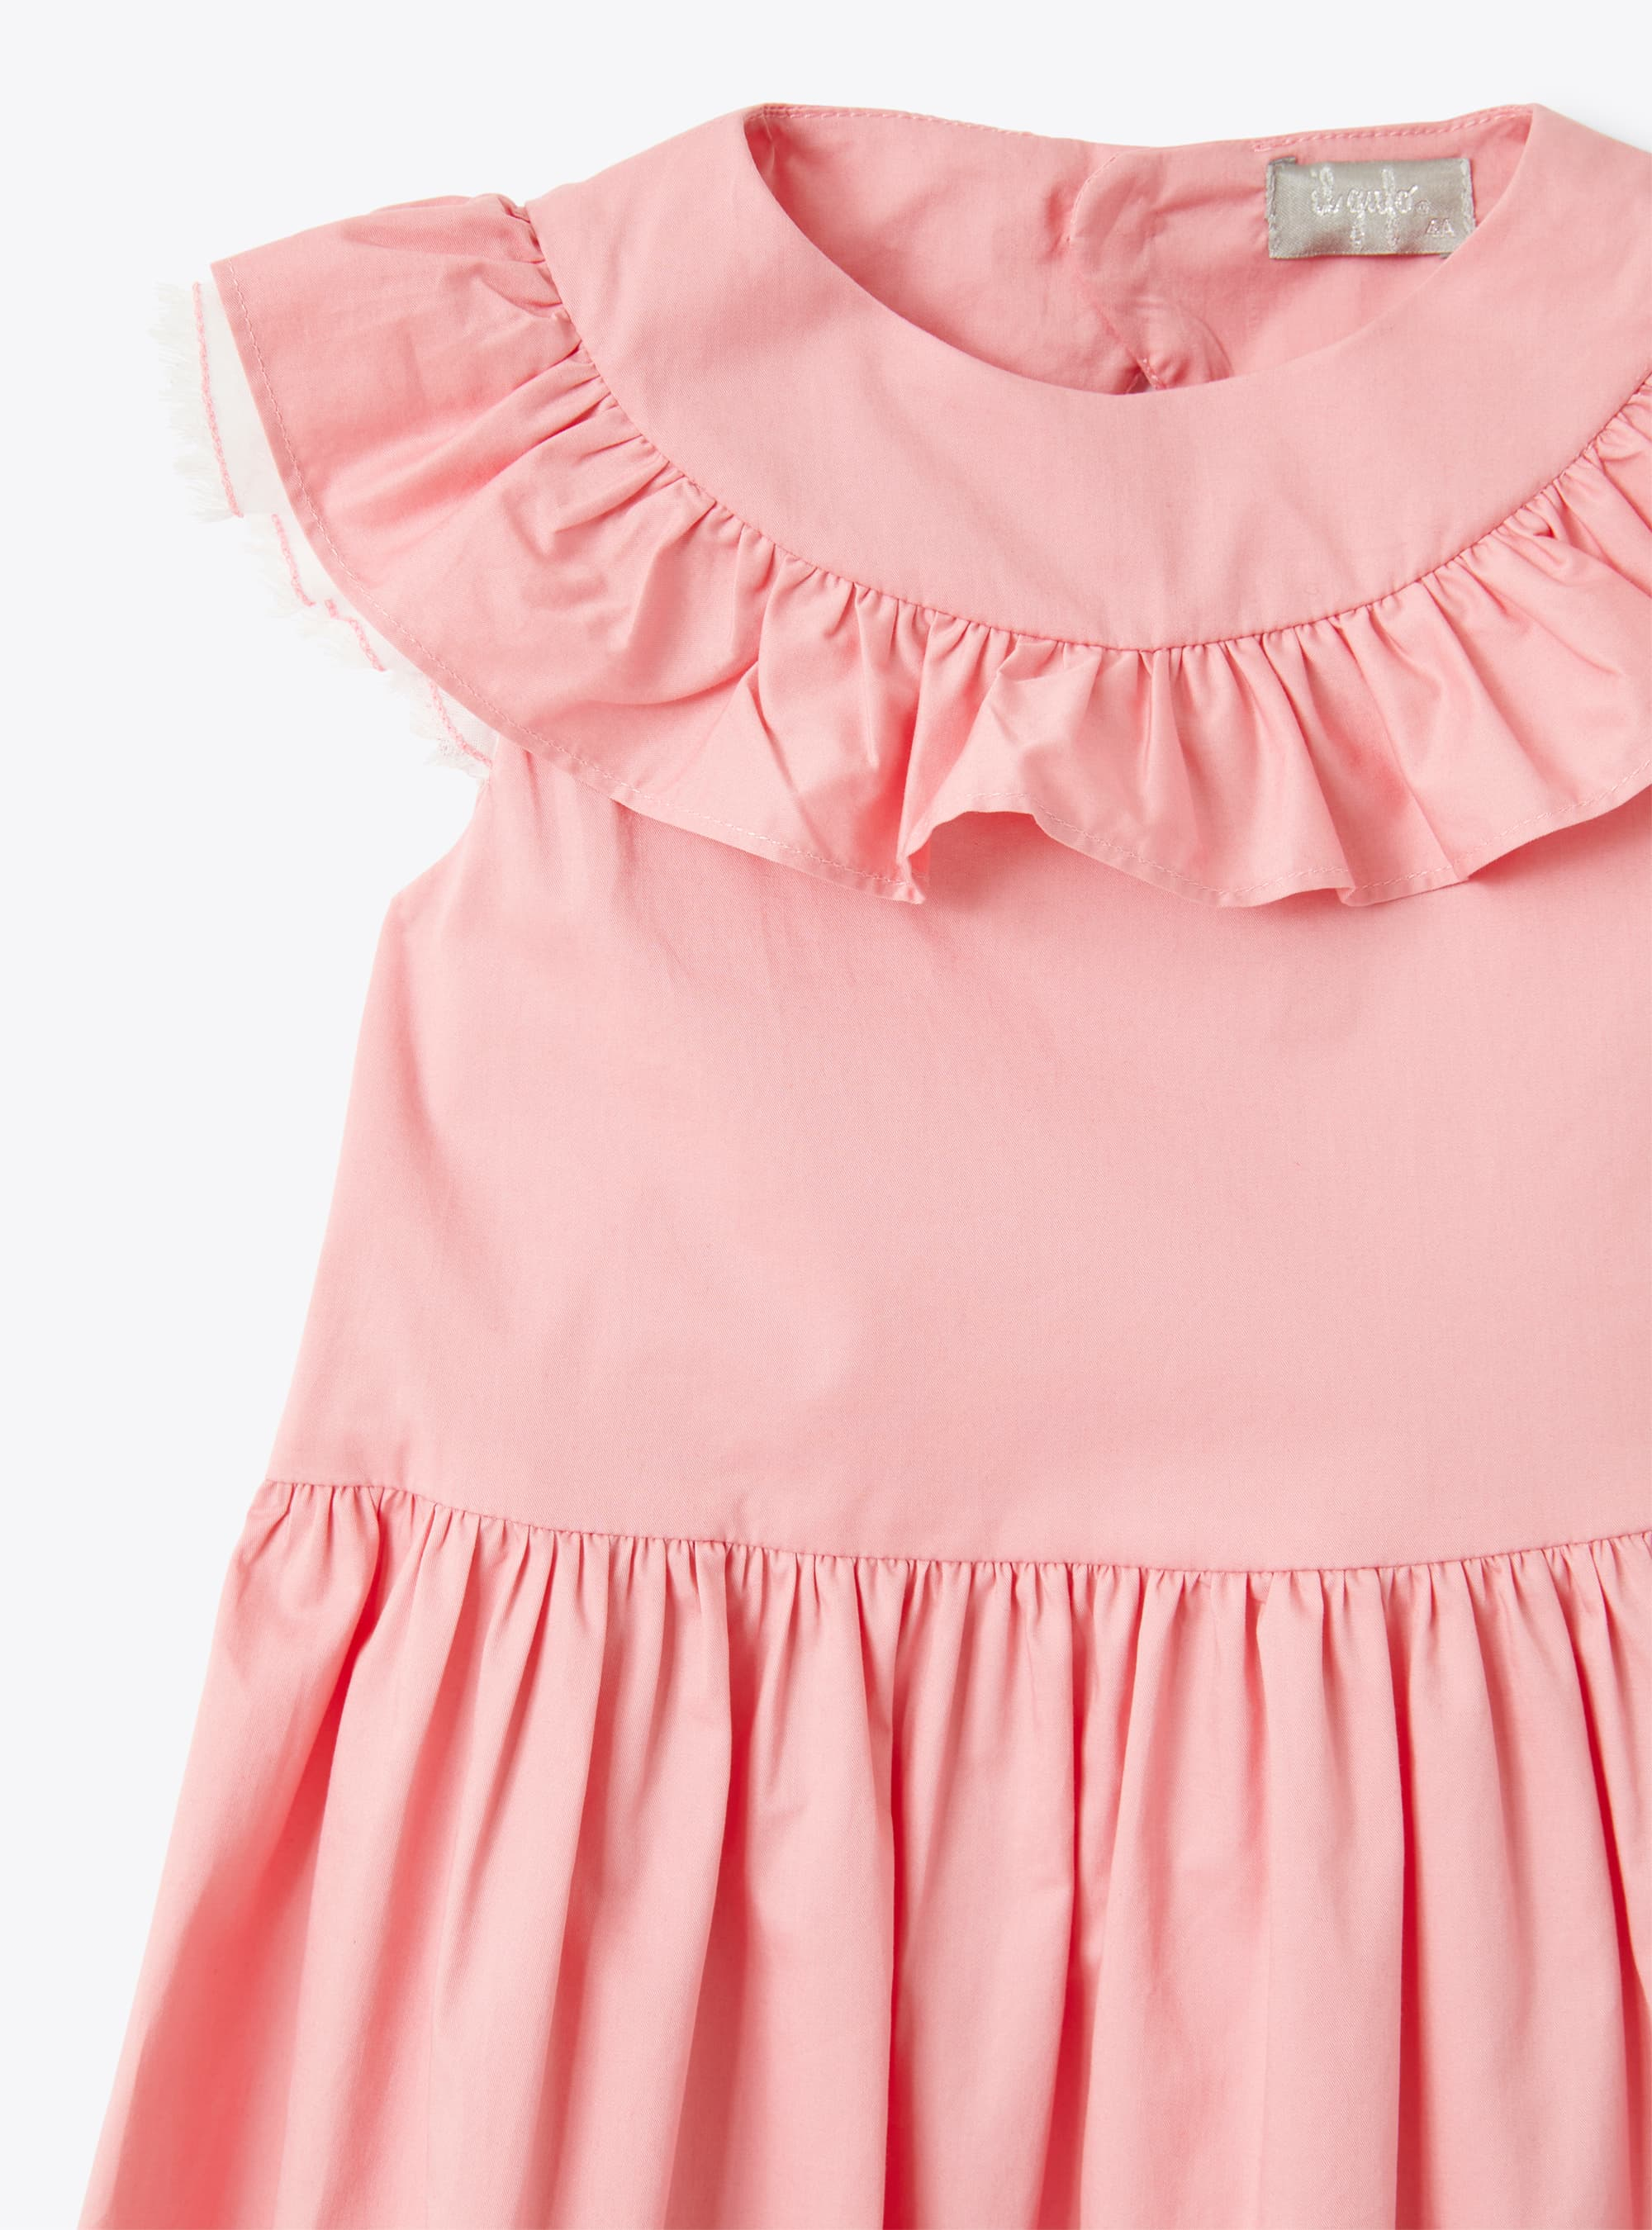 Sateen dress with ruffle detail - Pink | Il Gufo